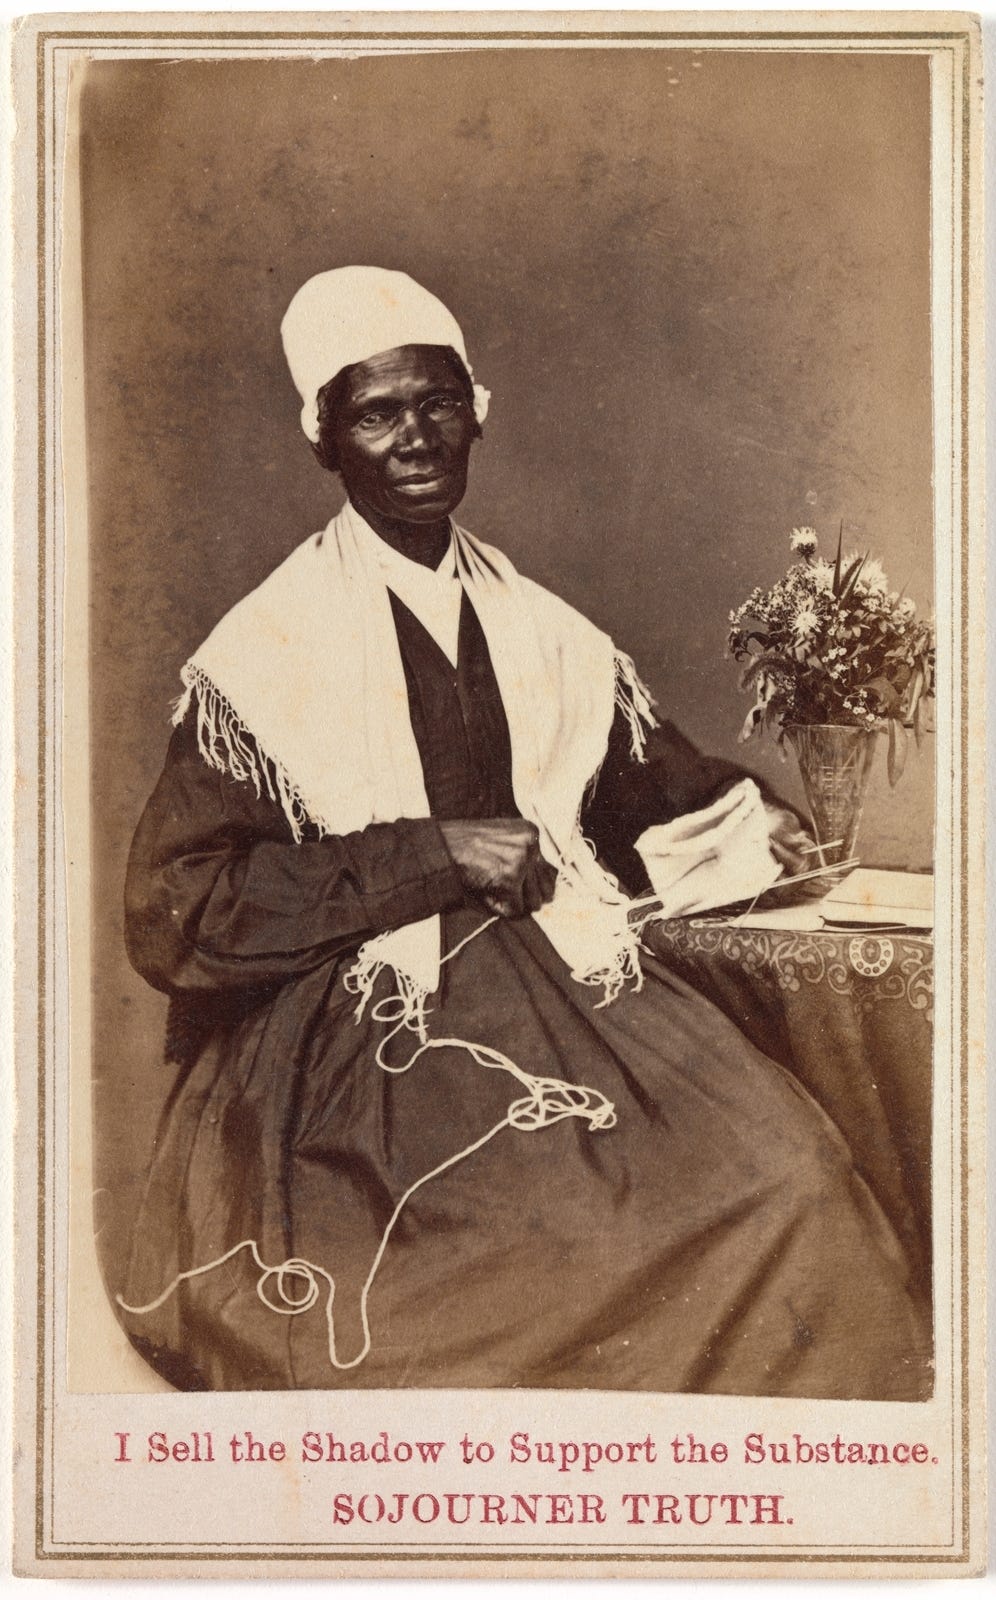 Albumen silver print from glass negative of Sojourner Truth sitting next to a small table with a vase of wild flowers wearing a long black dress, white shawl and cap with a knitting or crochet project in progress in her hands and lap